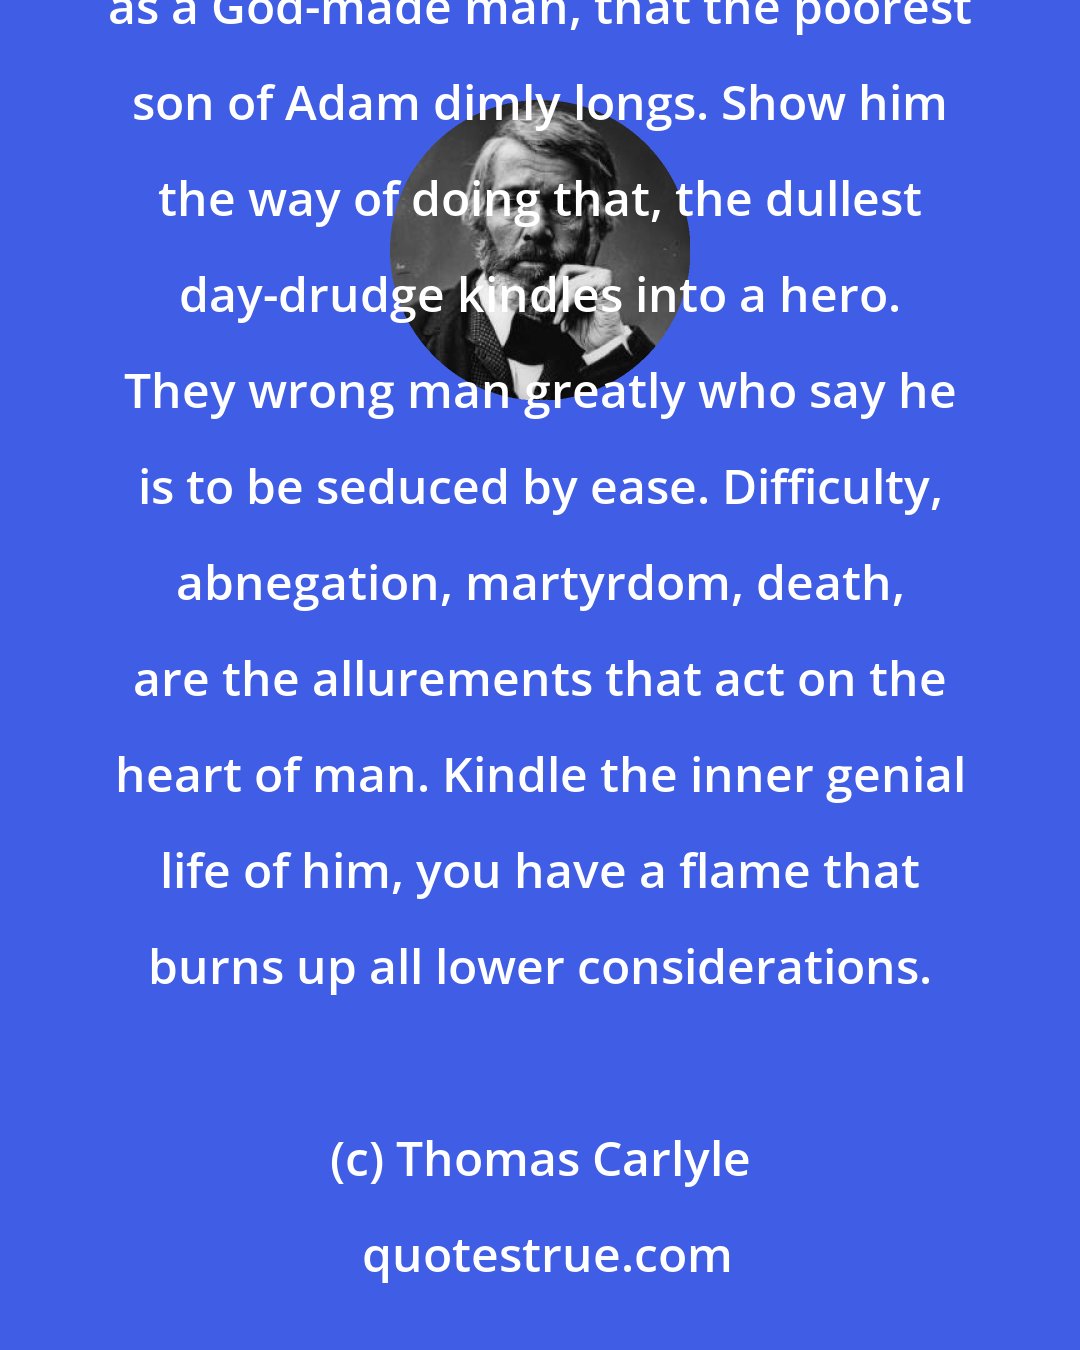 Thomas Carlyle: It is not to taste sweet things; but to do noble and true things, and vindicate himself under God's heaven as a God-made man, that the poorest son of Adam dimly longs. Show him the way of doing that, the dullest day-drudge kindles into a hero. They wrong man greatly who say he is to be seduced by ease. Difficulty, abnegation, martyrdom, death, are the allurements that act on the heart of man. Kindle the inner genial life of him, you have a flame that burns up all lower considerations.